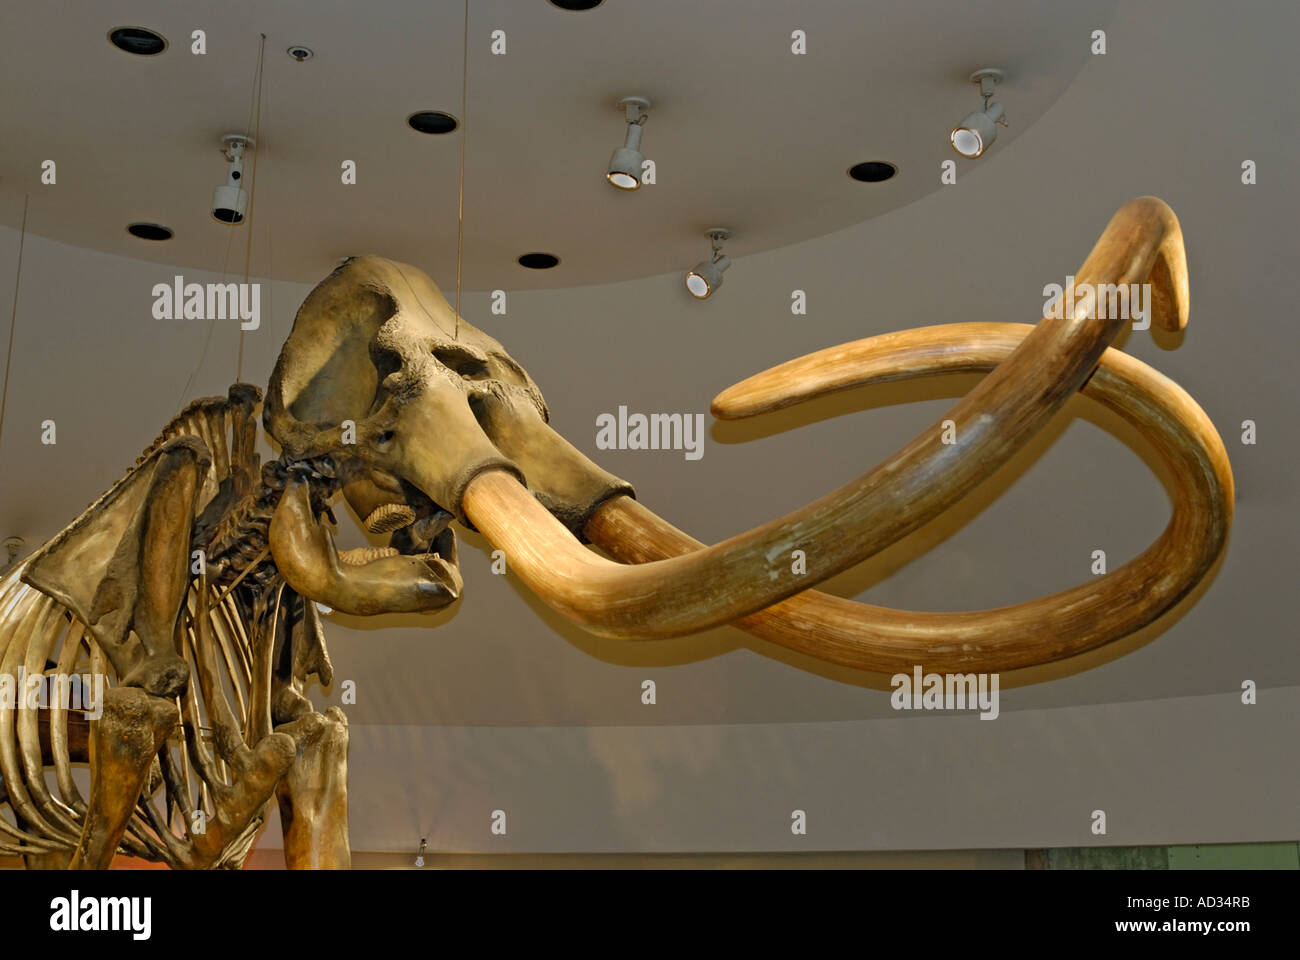 Columbian Mammoth, Mammuthus columbi, prehistoric skeleton with tusks from La Brea Tar Pits, Page Museum Stock Photo